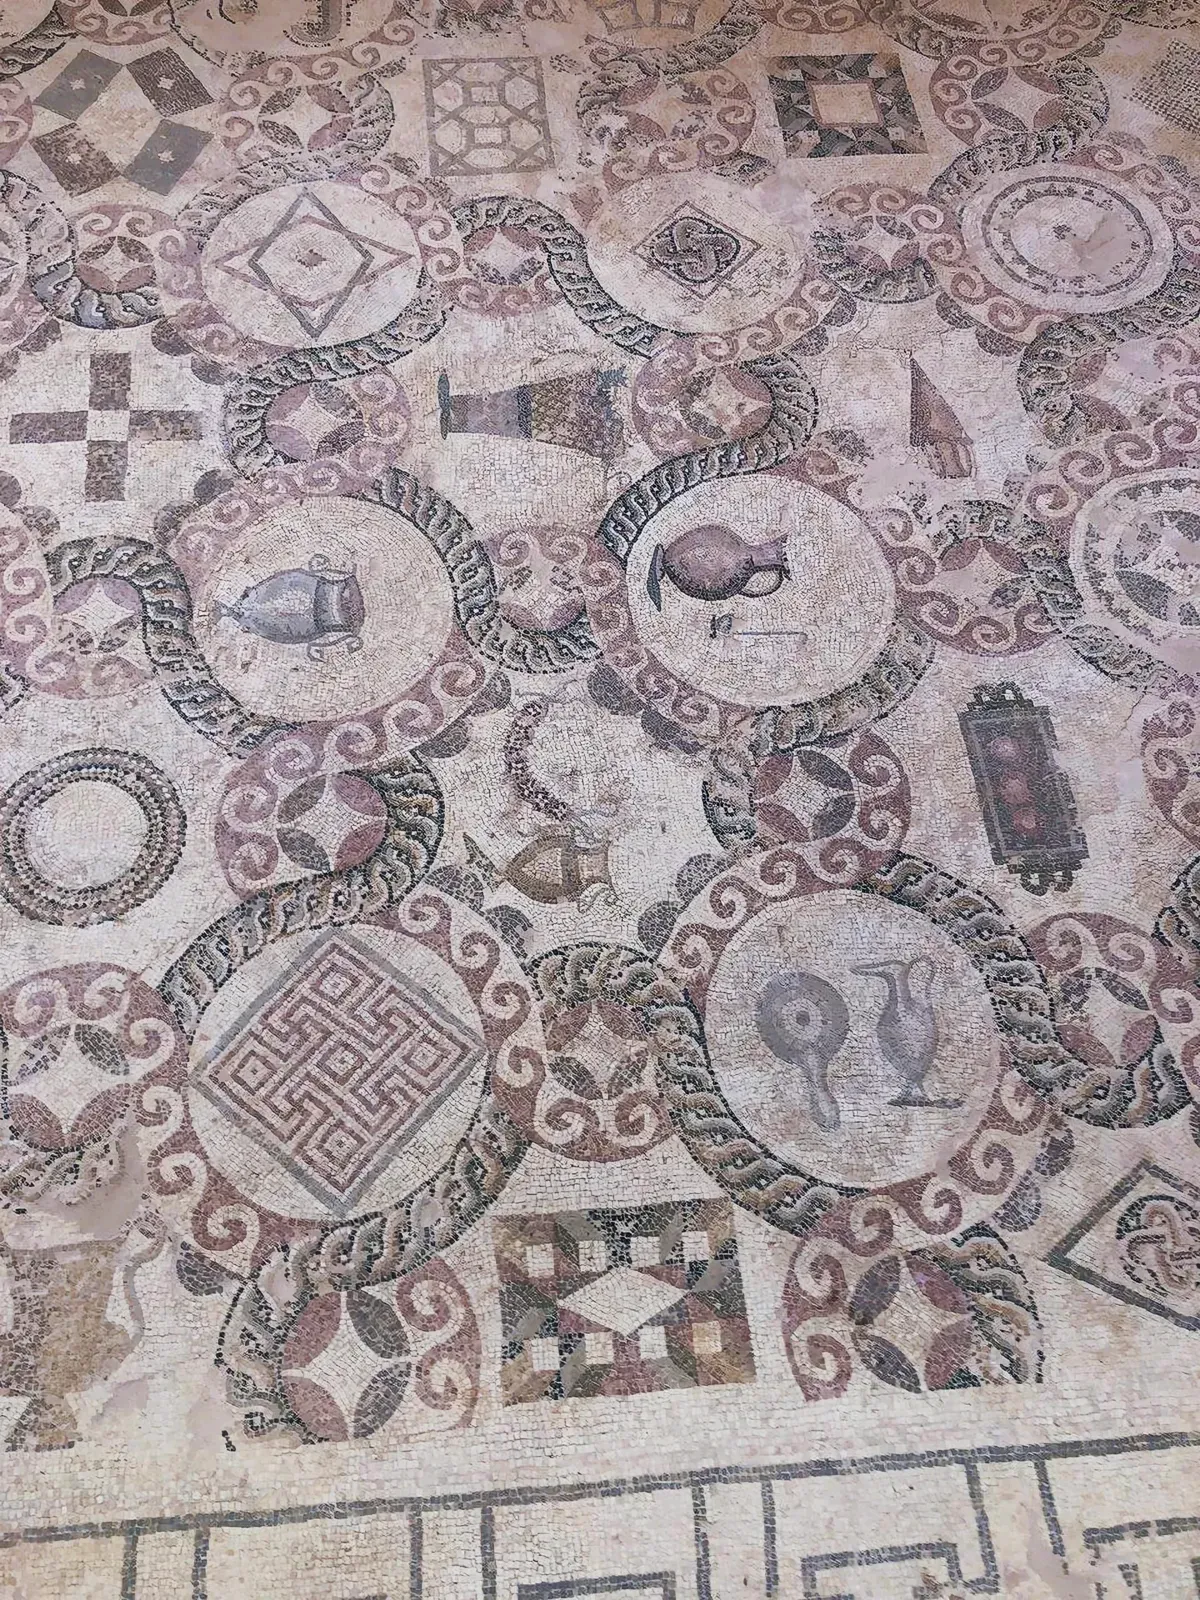 Intricate mosaic floor with cups, jug, sword, circle design, square with number, and bird